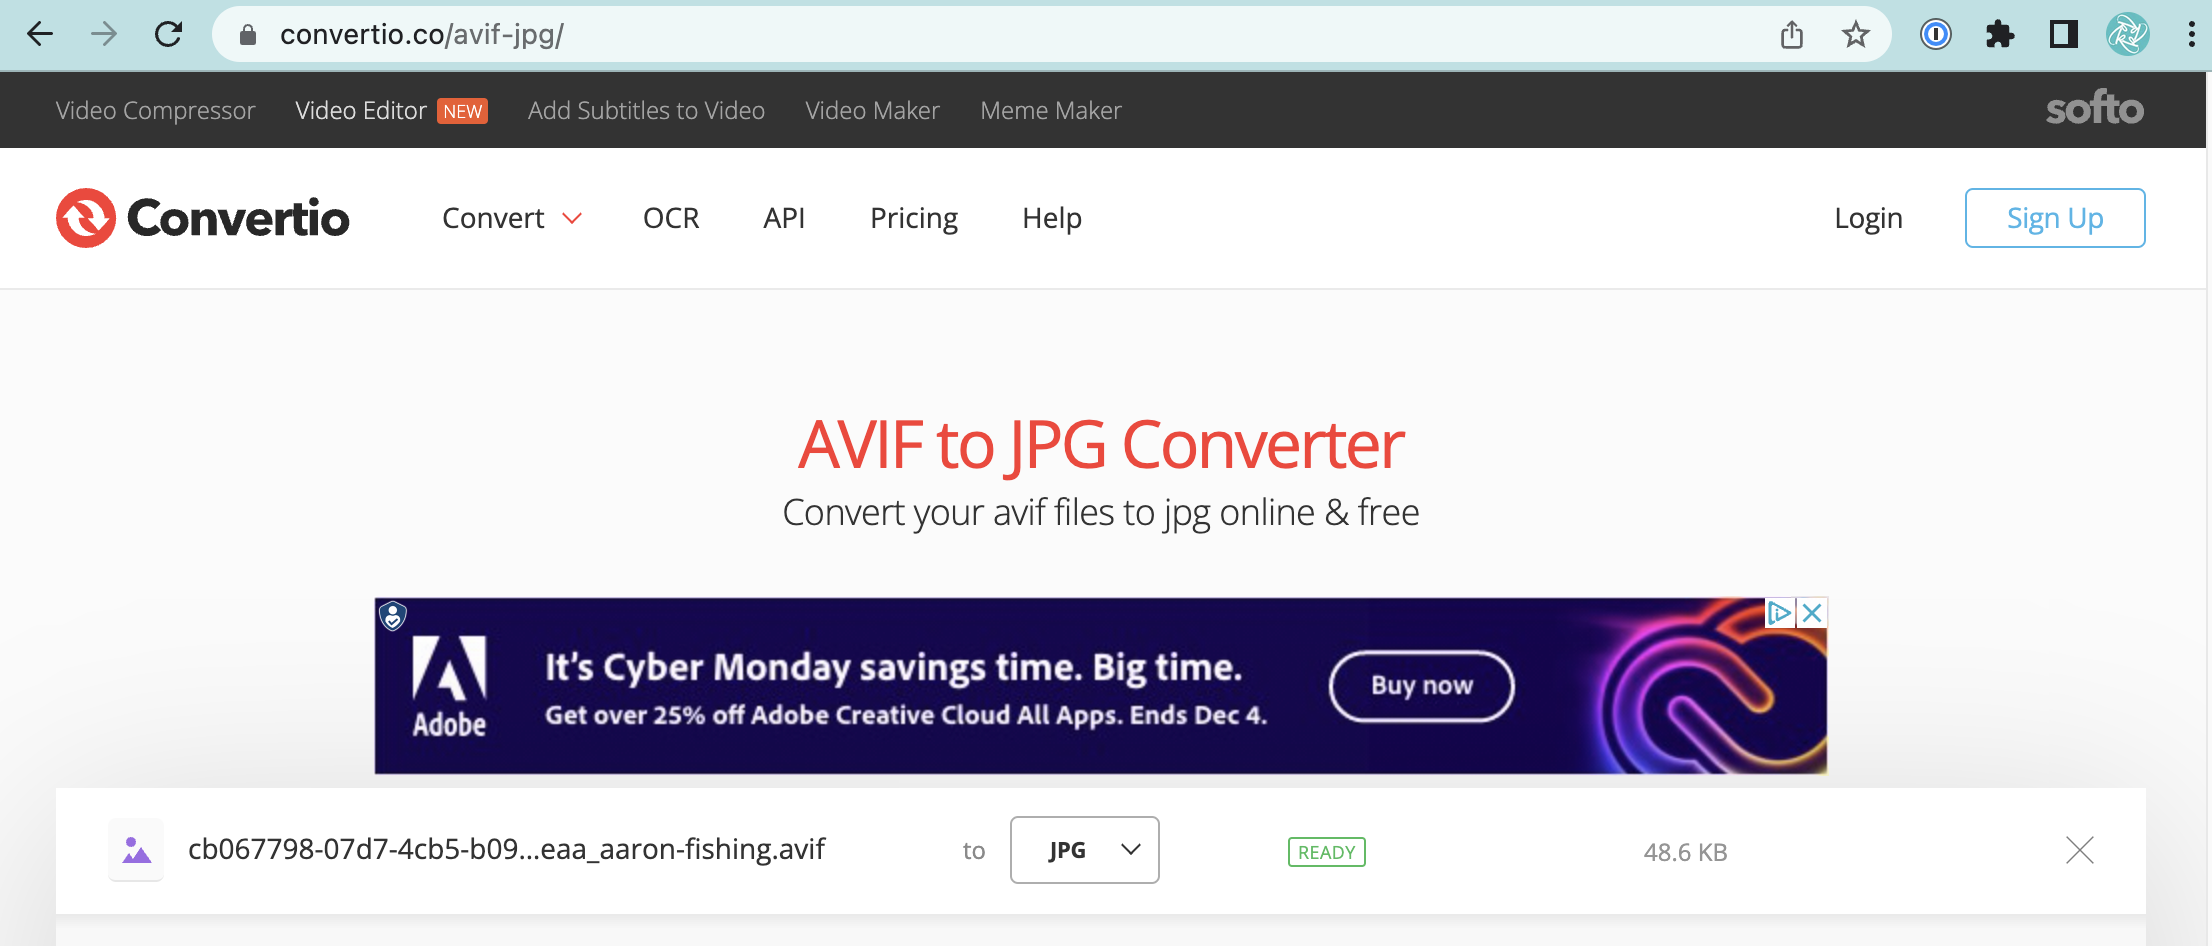 Use Covertio, a free ad-based service to upload your .AVIF file, choose your new file format, and download the newly converted image file.